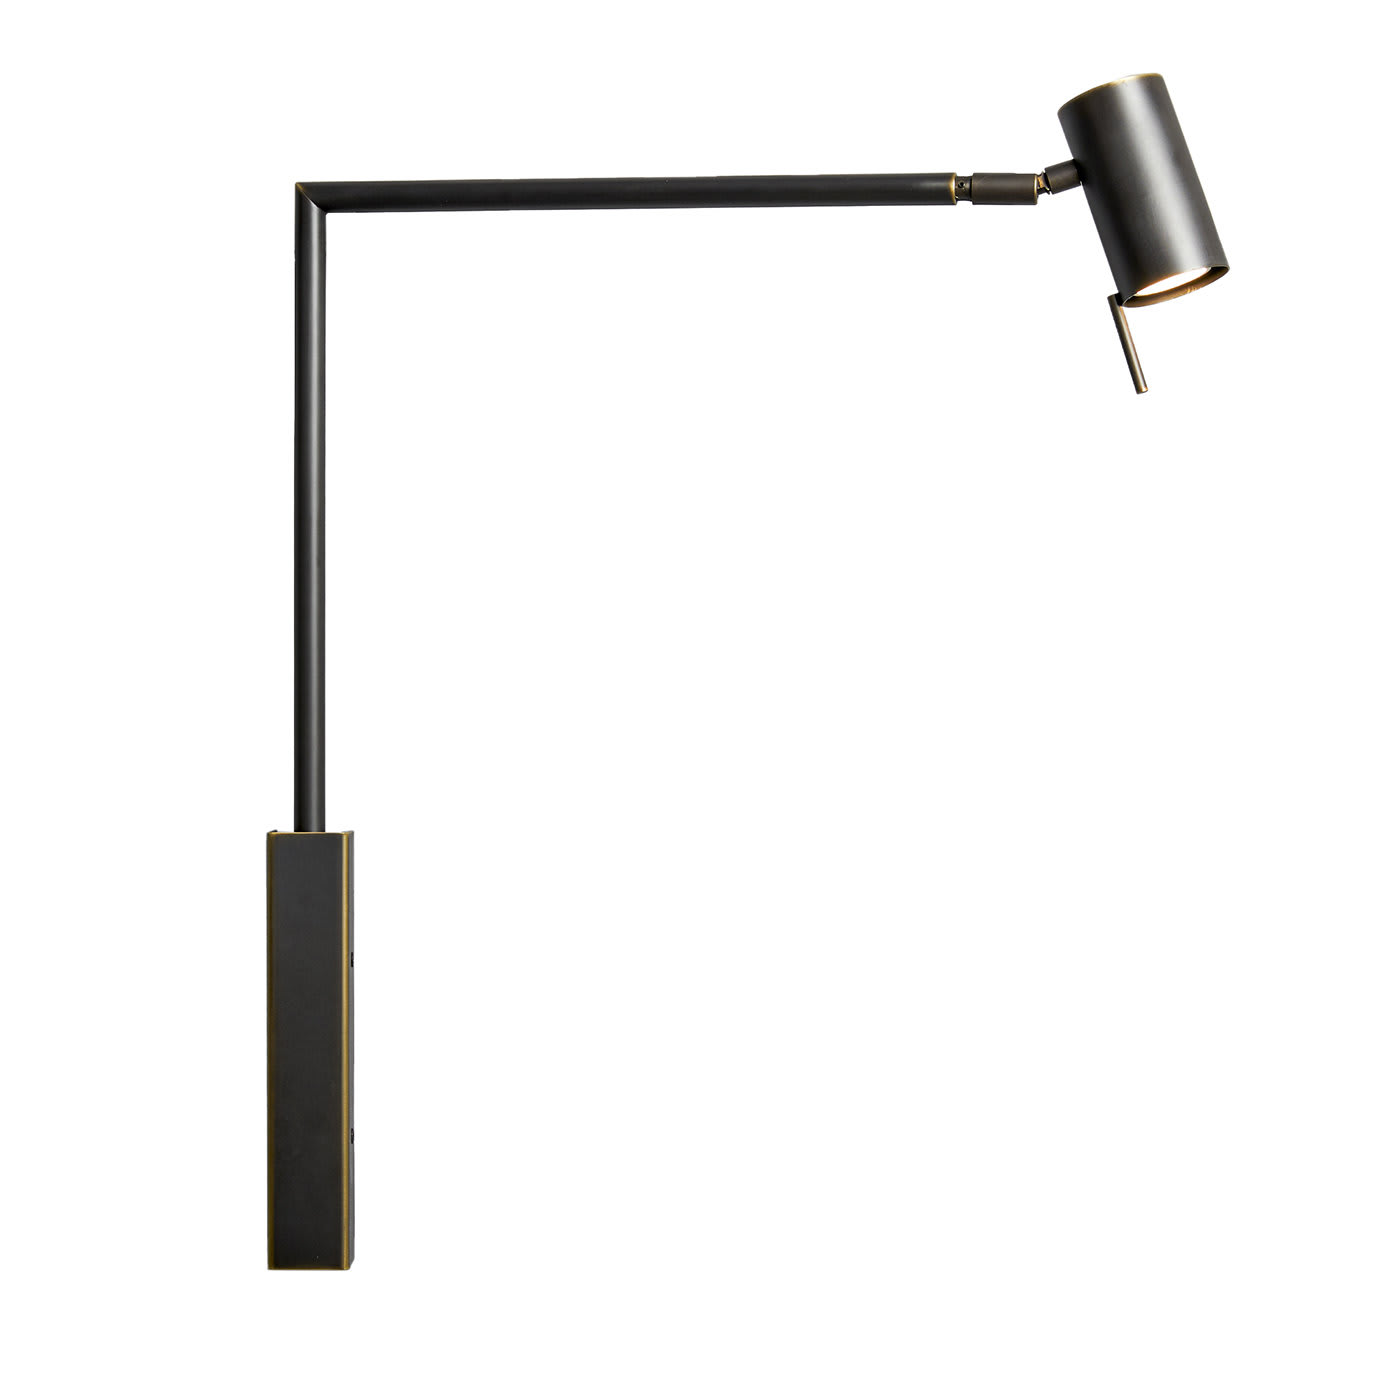 Rectus Wall Lamp with Adjustable Arm - VeniceM